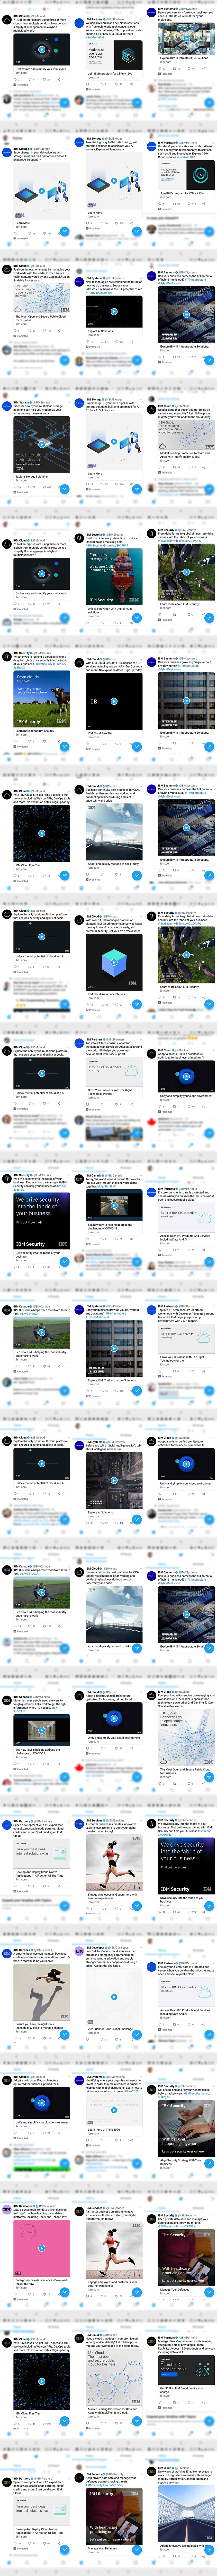 Part two, a collage of 60 additional Twitter ads for IBM, with titles like “71% of enterprises are using three or more clouds from multiple vendors. How do you simplify IT management in a hybrid multicloud world?” or “We help ISVs build and sell cloud solutions with free technology, tech consults, open source code patterns, GTM support and sales channels” or “Before you can transform your business, you need IT infrastructure built for hybrid multicloud”.